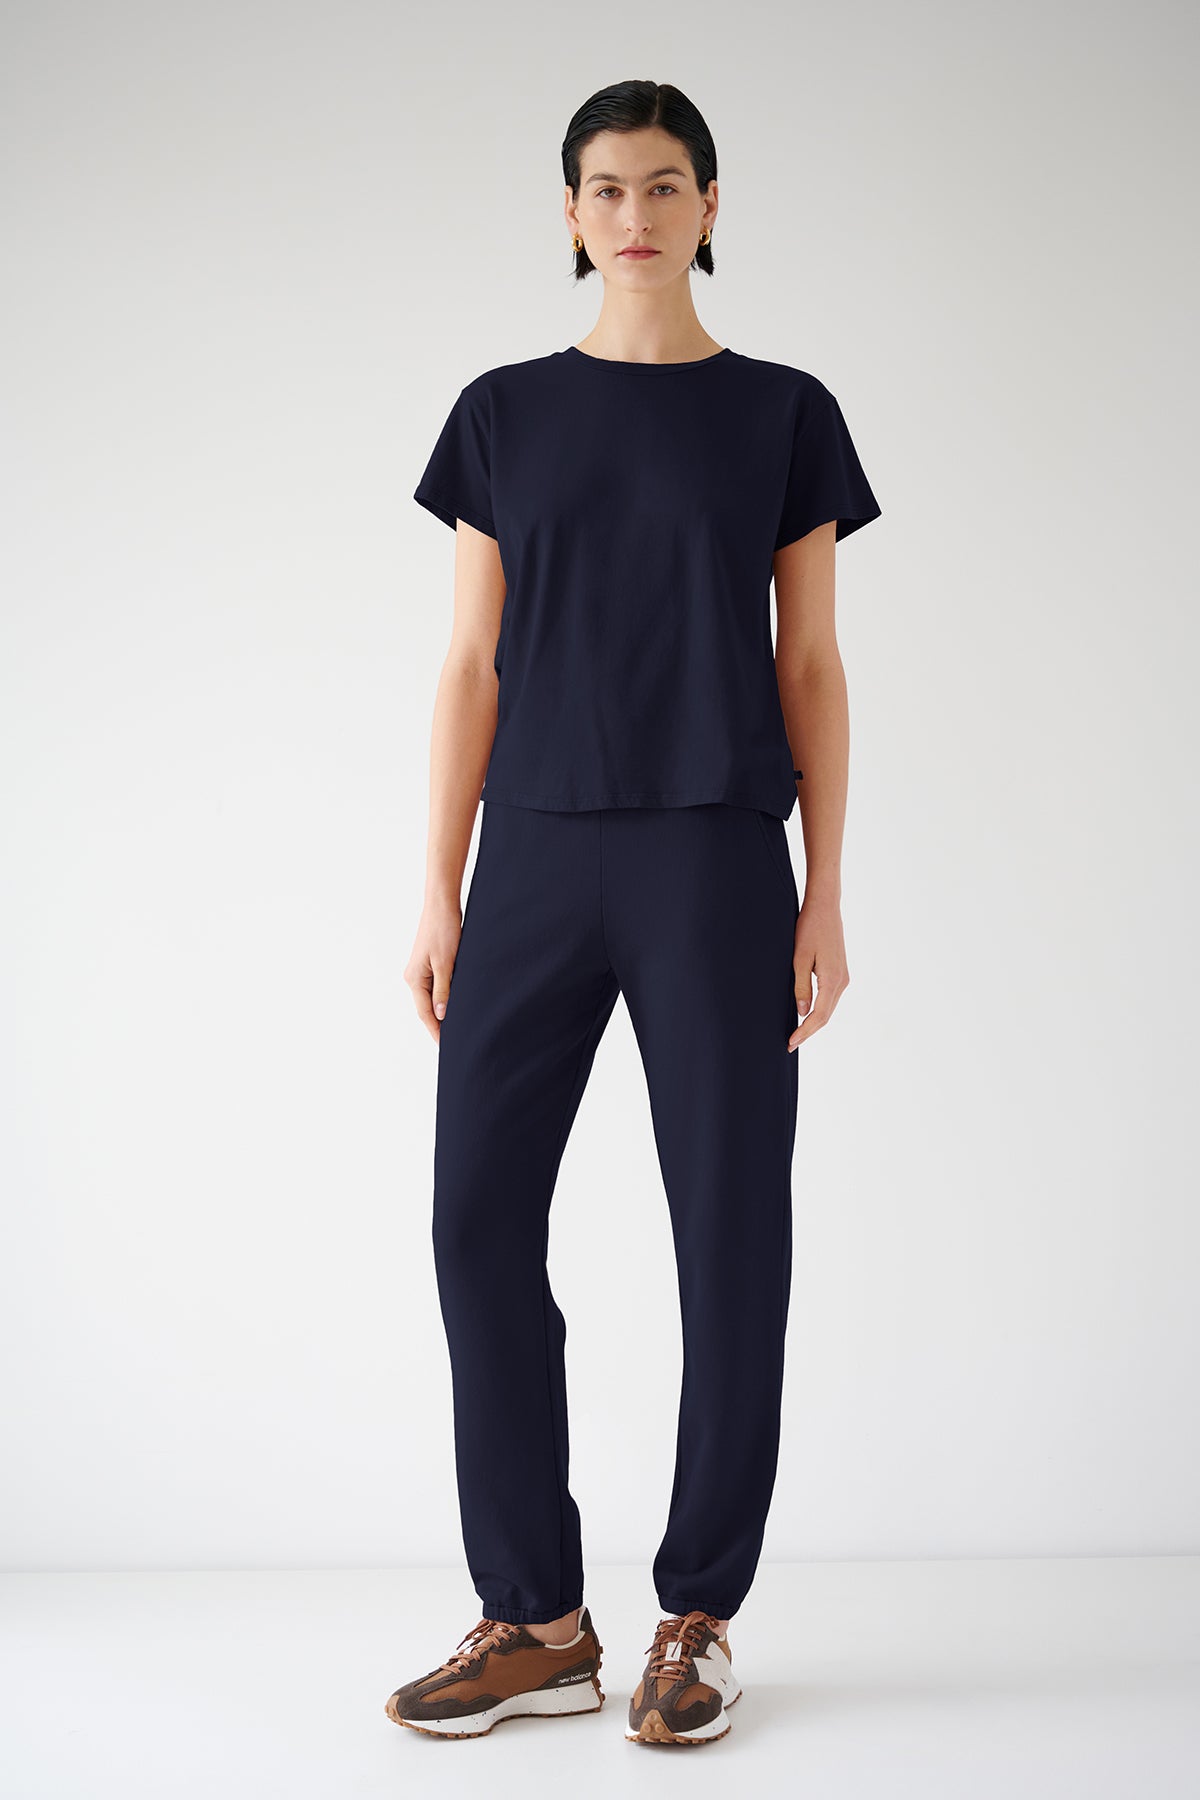 A woman in a navy blue organic cotton t-shirt and ZUMA SWEATPANT stands against a white background, wearing brown and beige sneakers by Velvet by Jenny Graham.-36891041366209